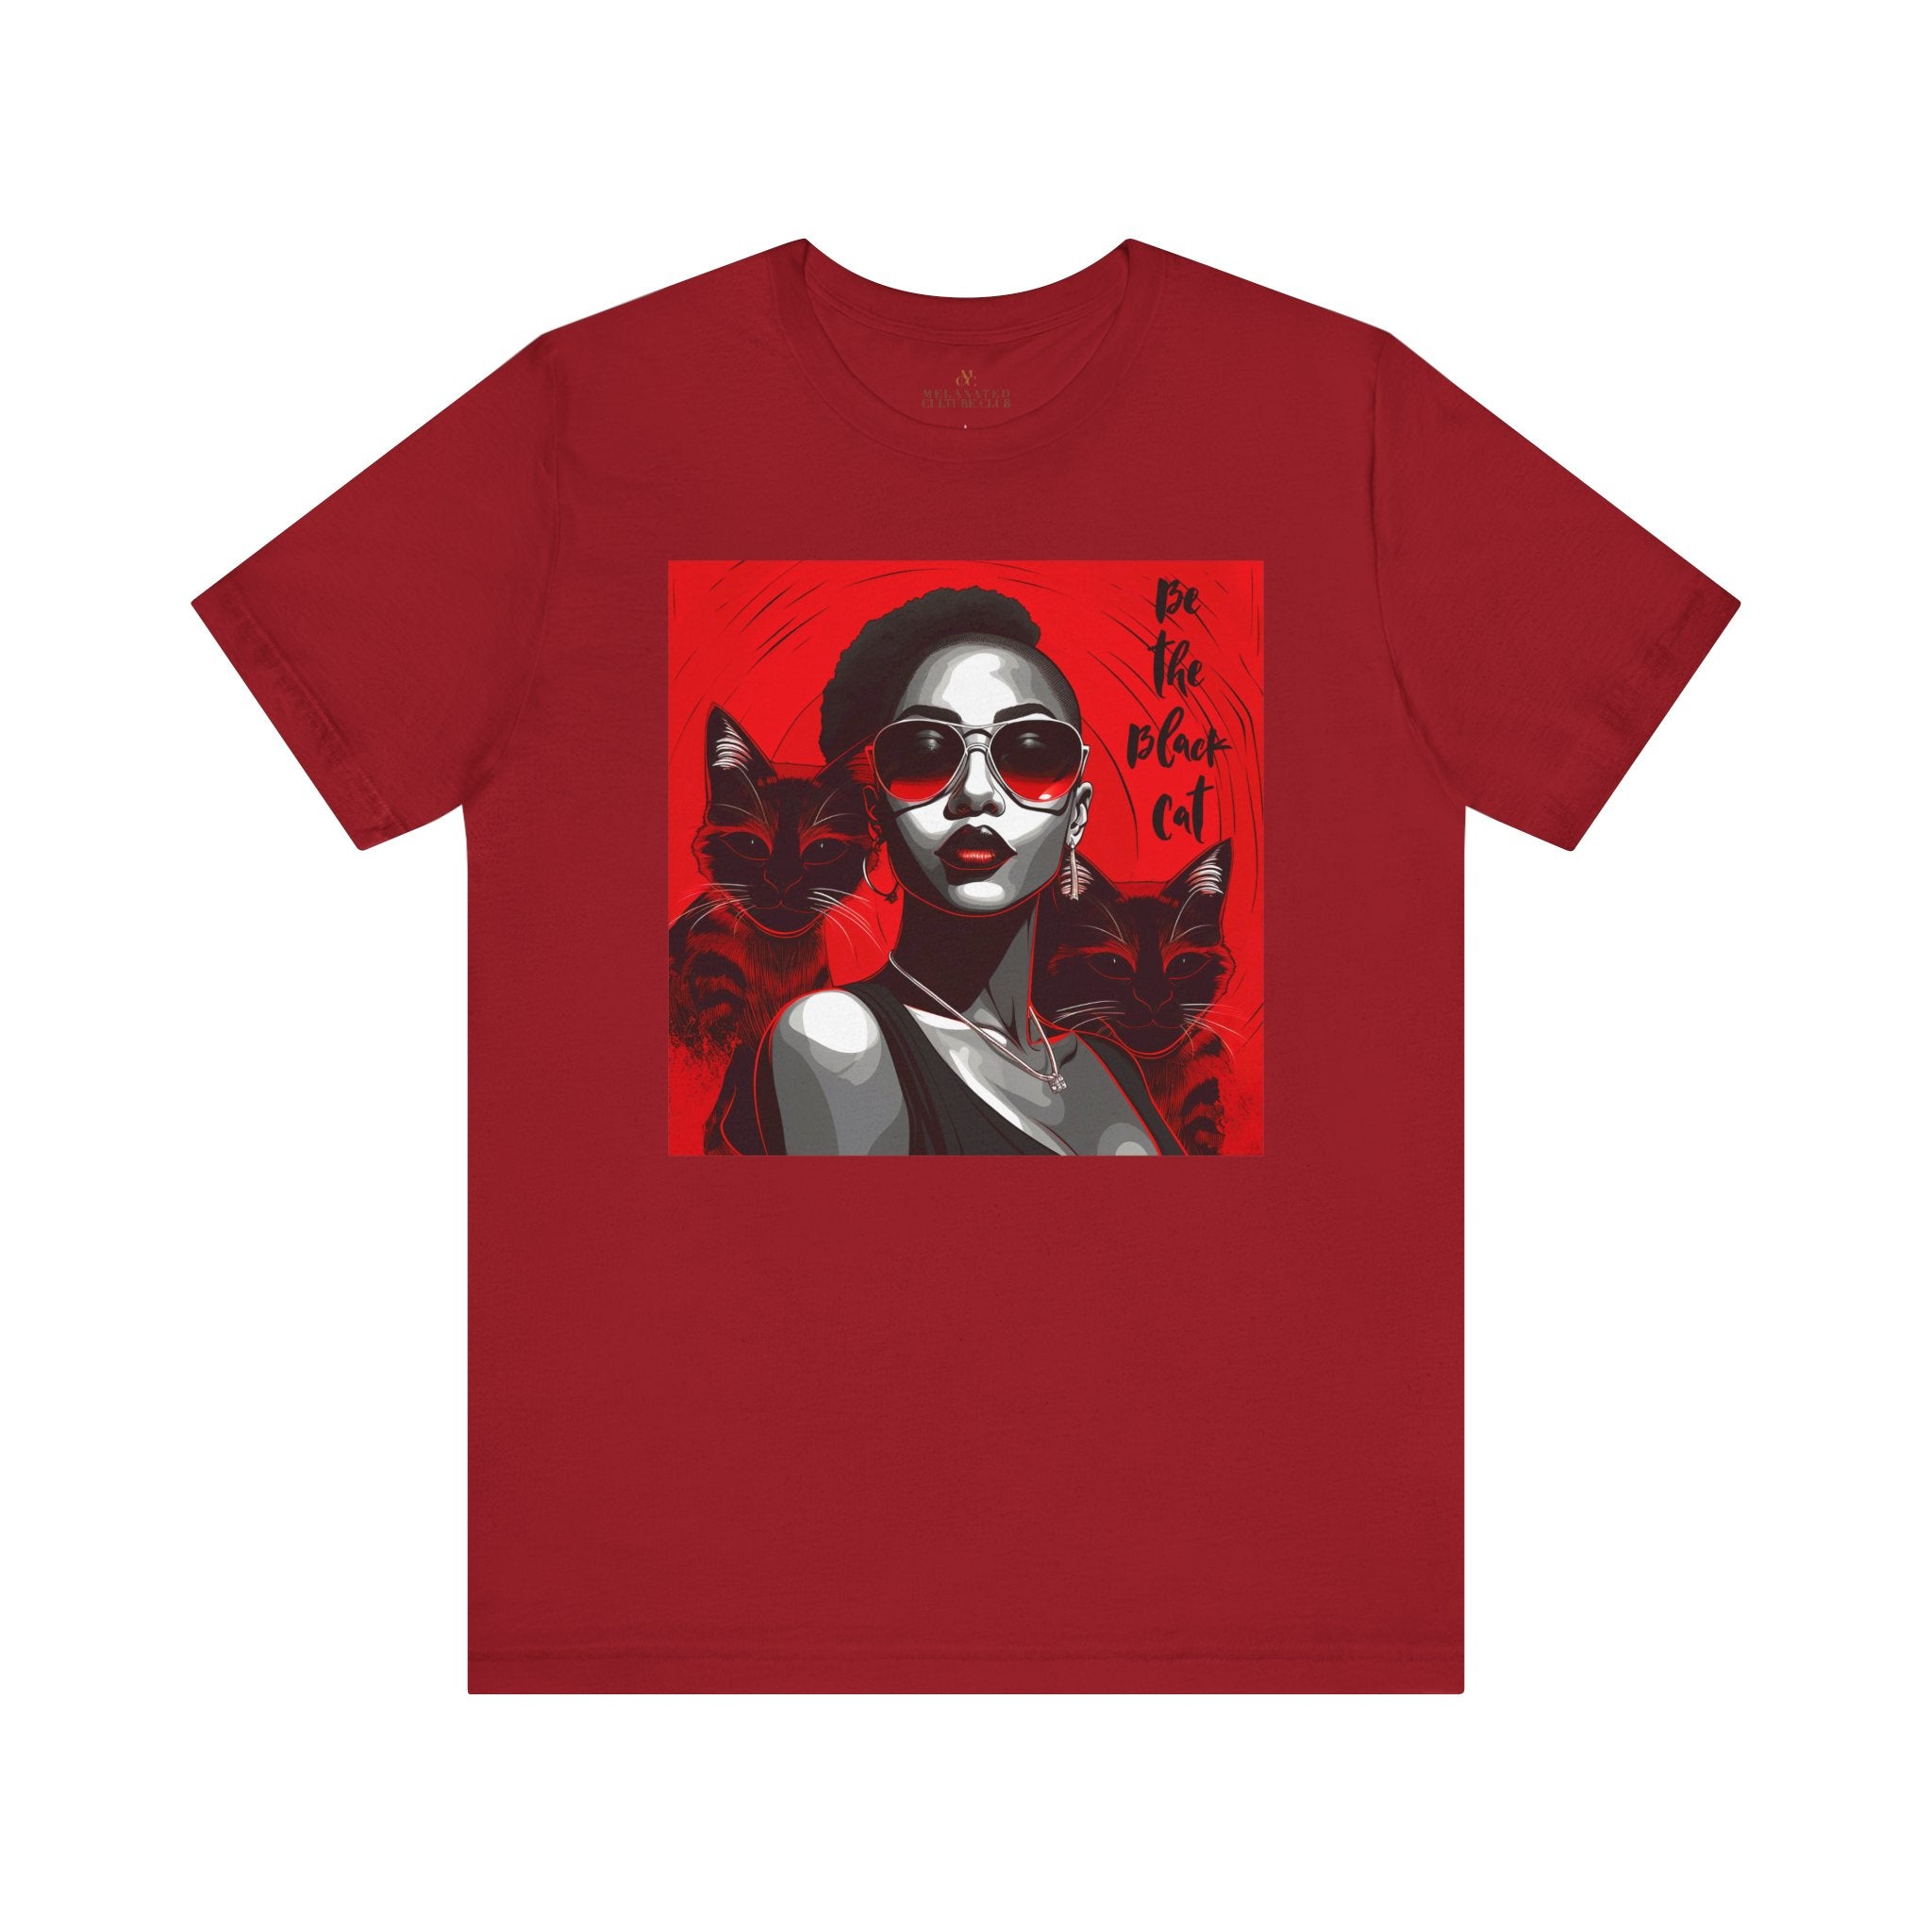 Black Woman Be the Black Cat Tee Shirt in red.